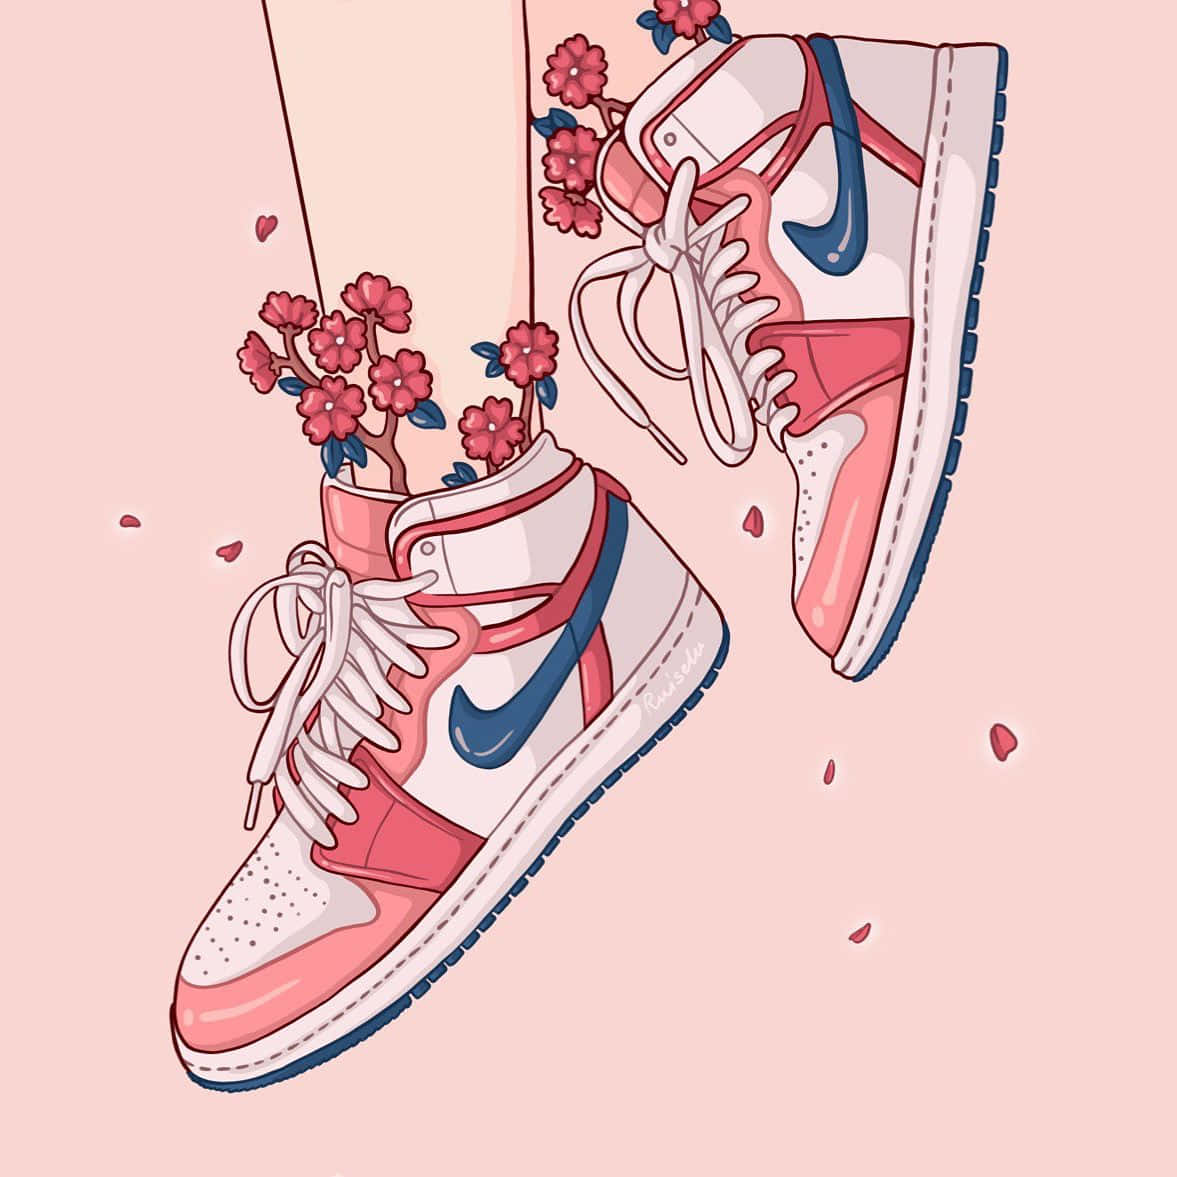 A Pair Of Sneakers With Flowers On Them